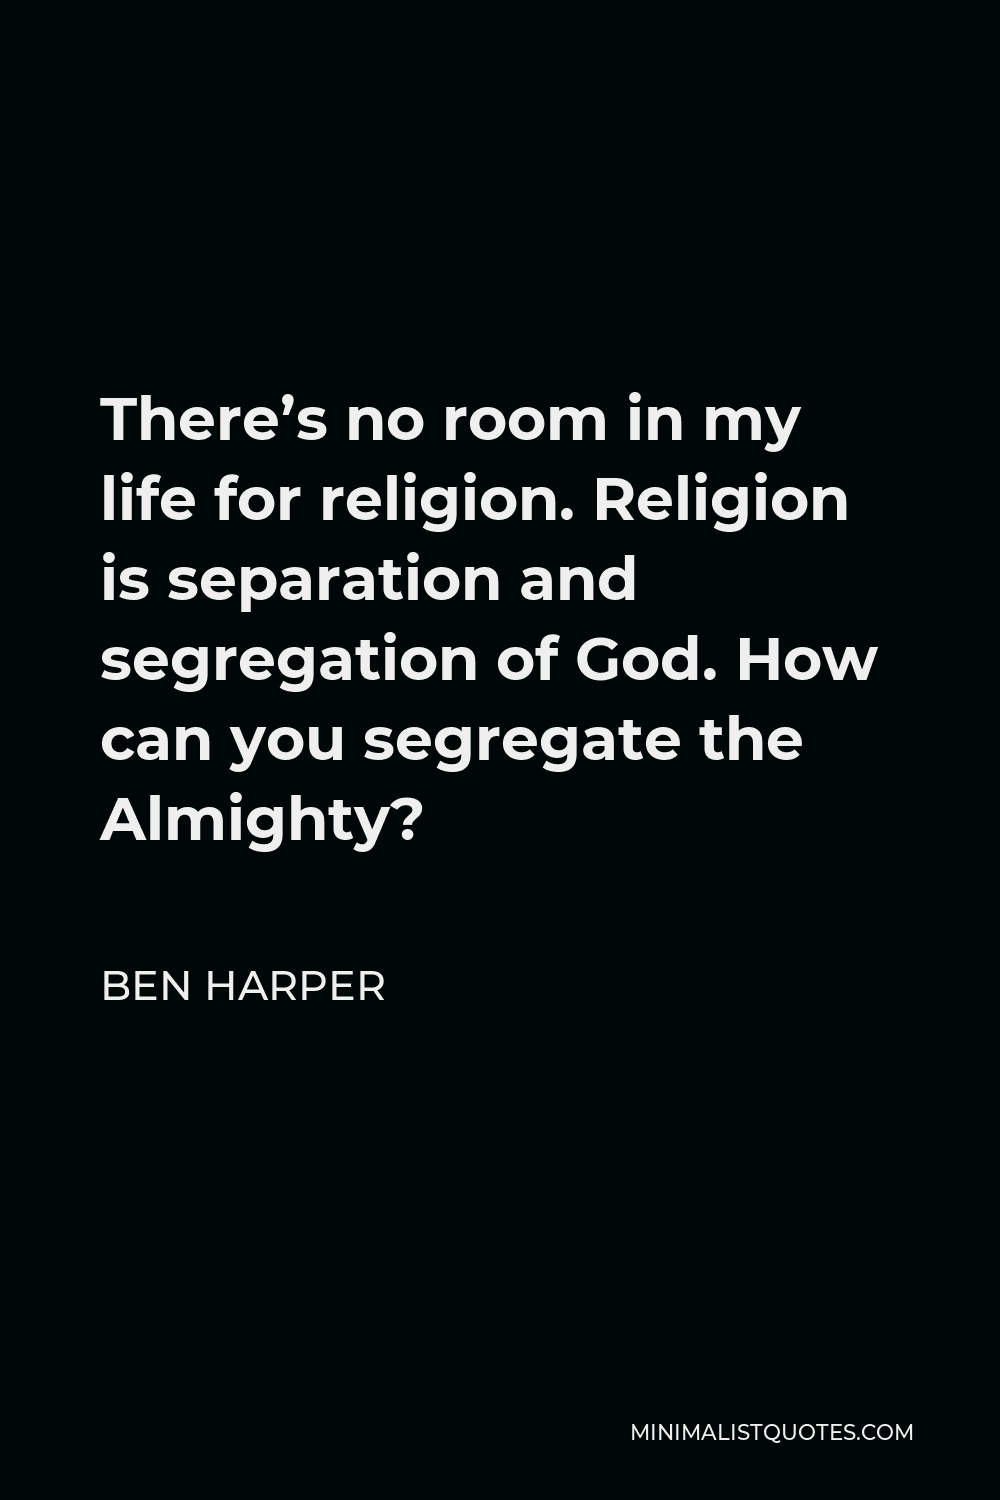 Ben Harper Quote - There’s no room in my life for religion. Religion is separation and segregation of God. How can you segregate the Almighty?